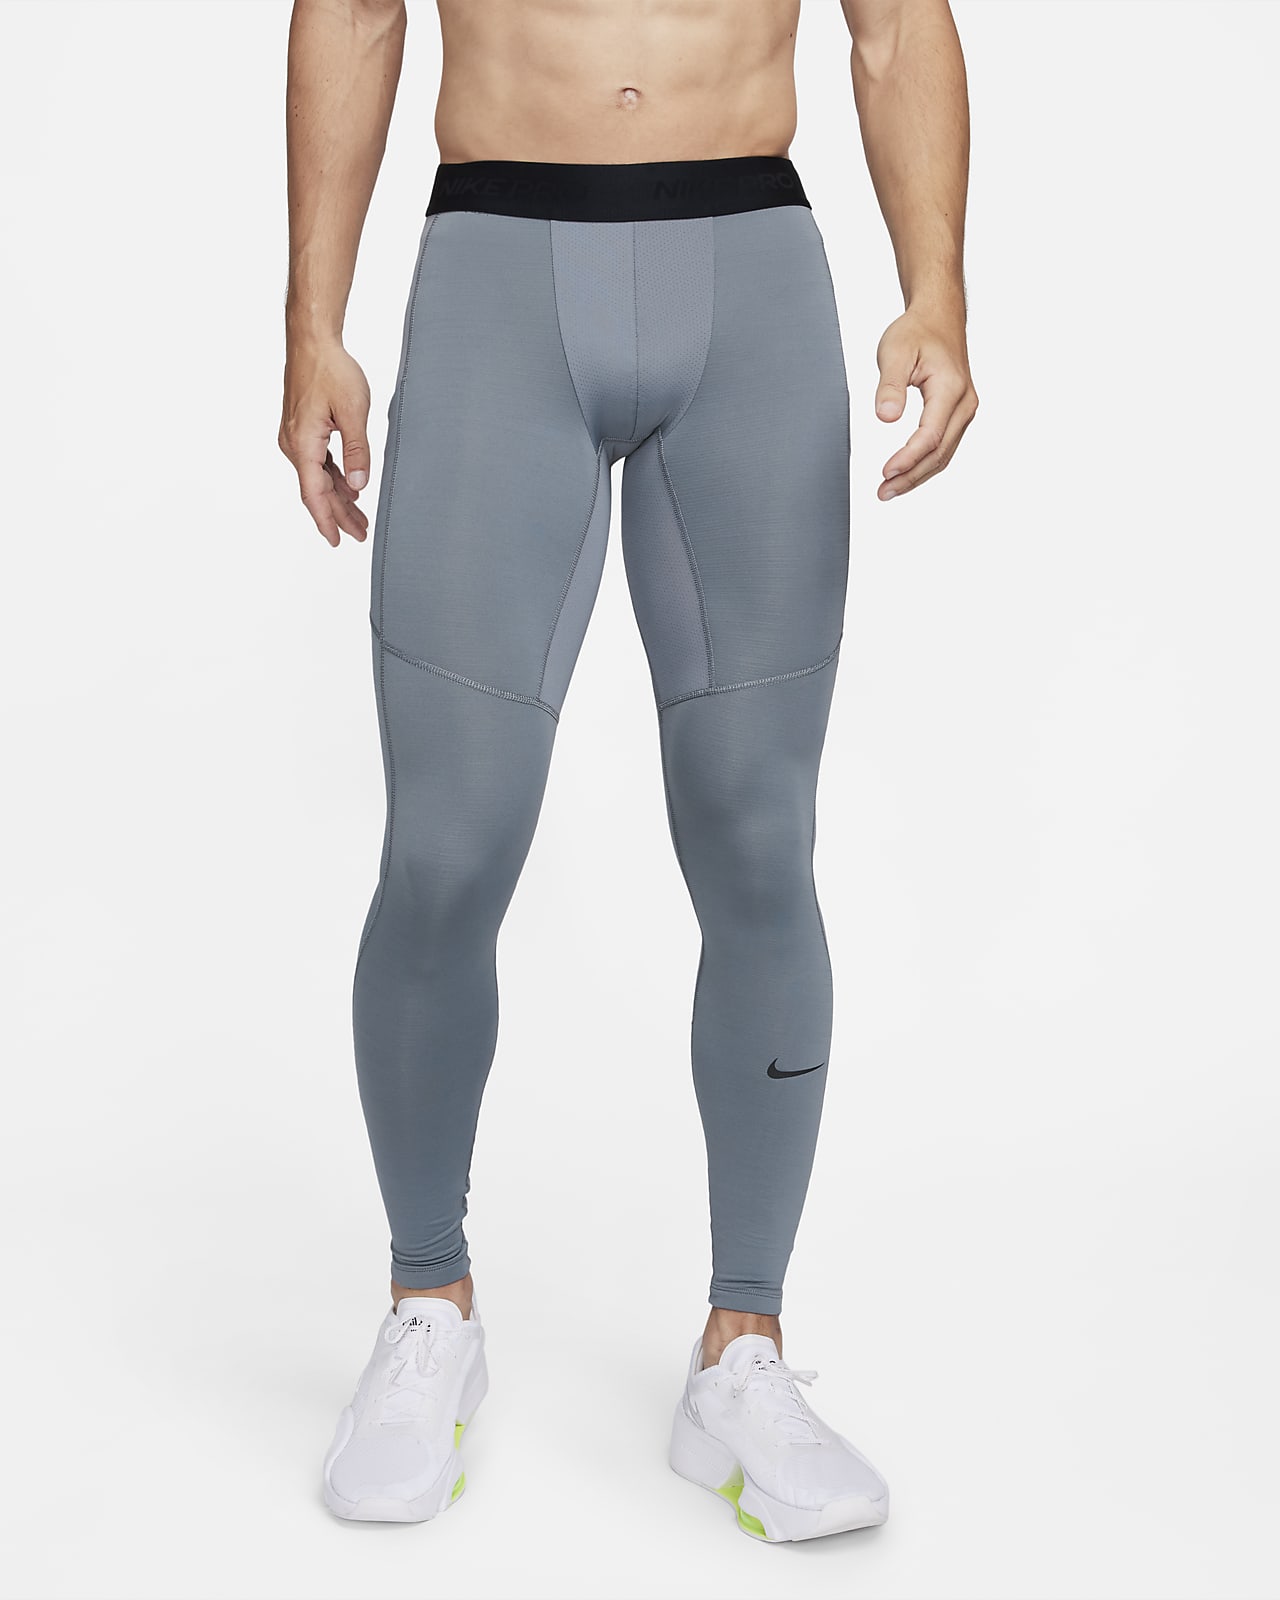 nike pro combat leggings - clothing & accessories - by owner